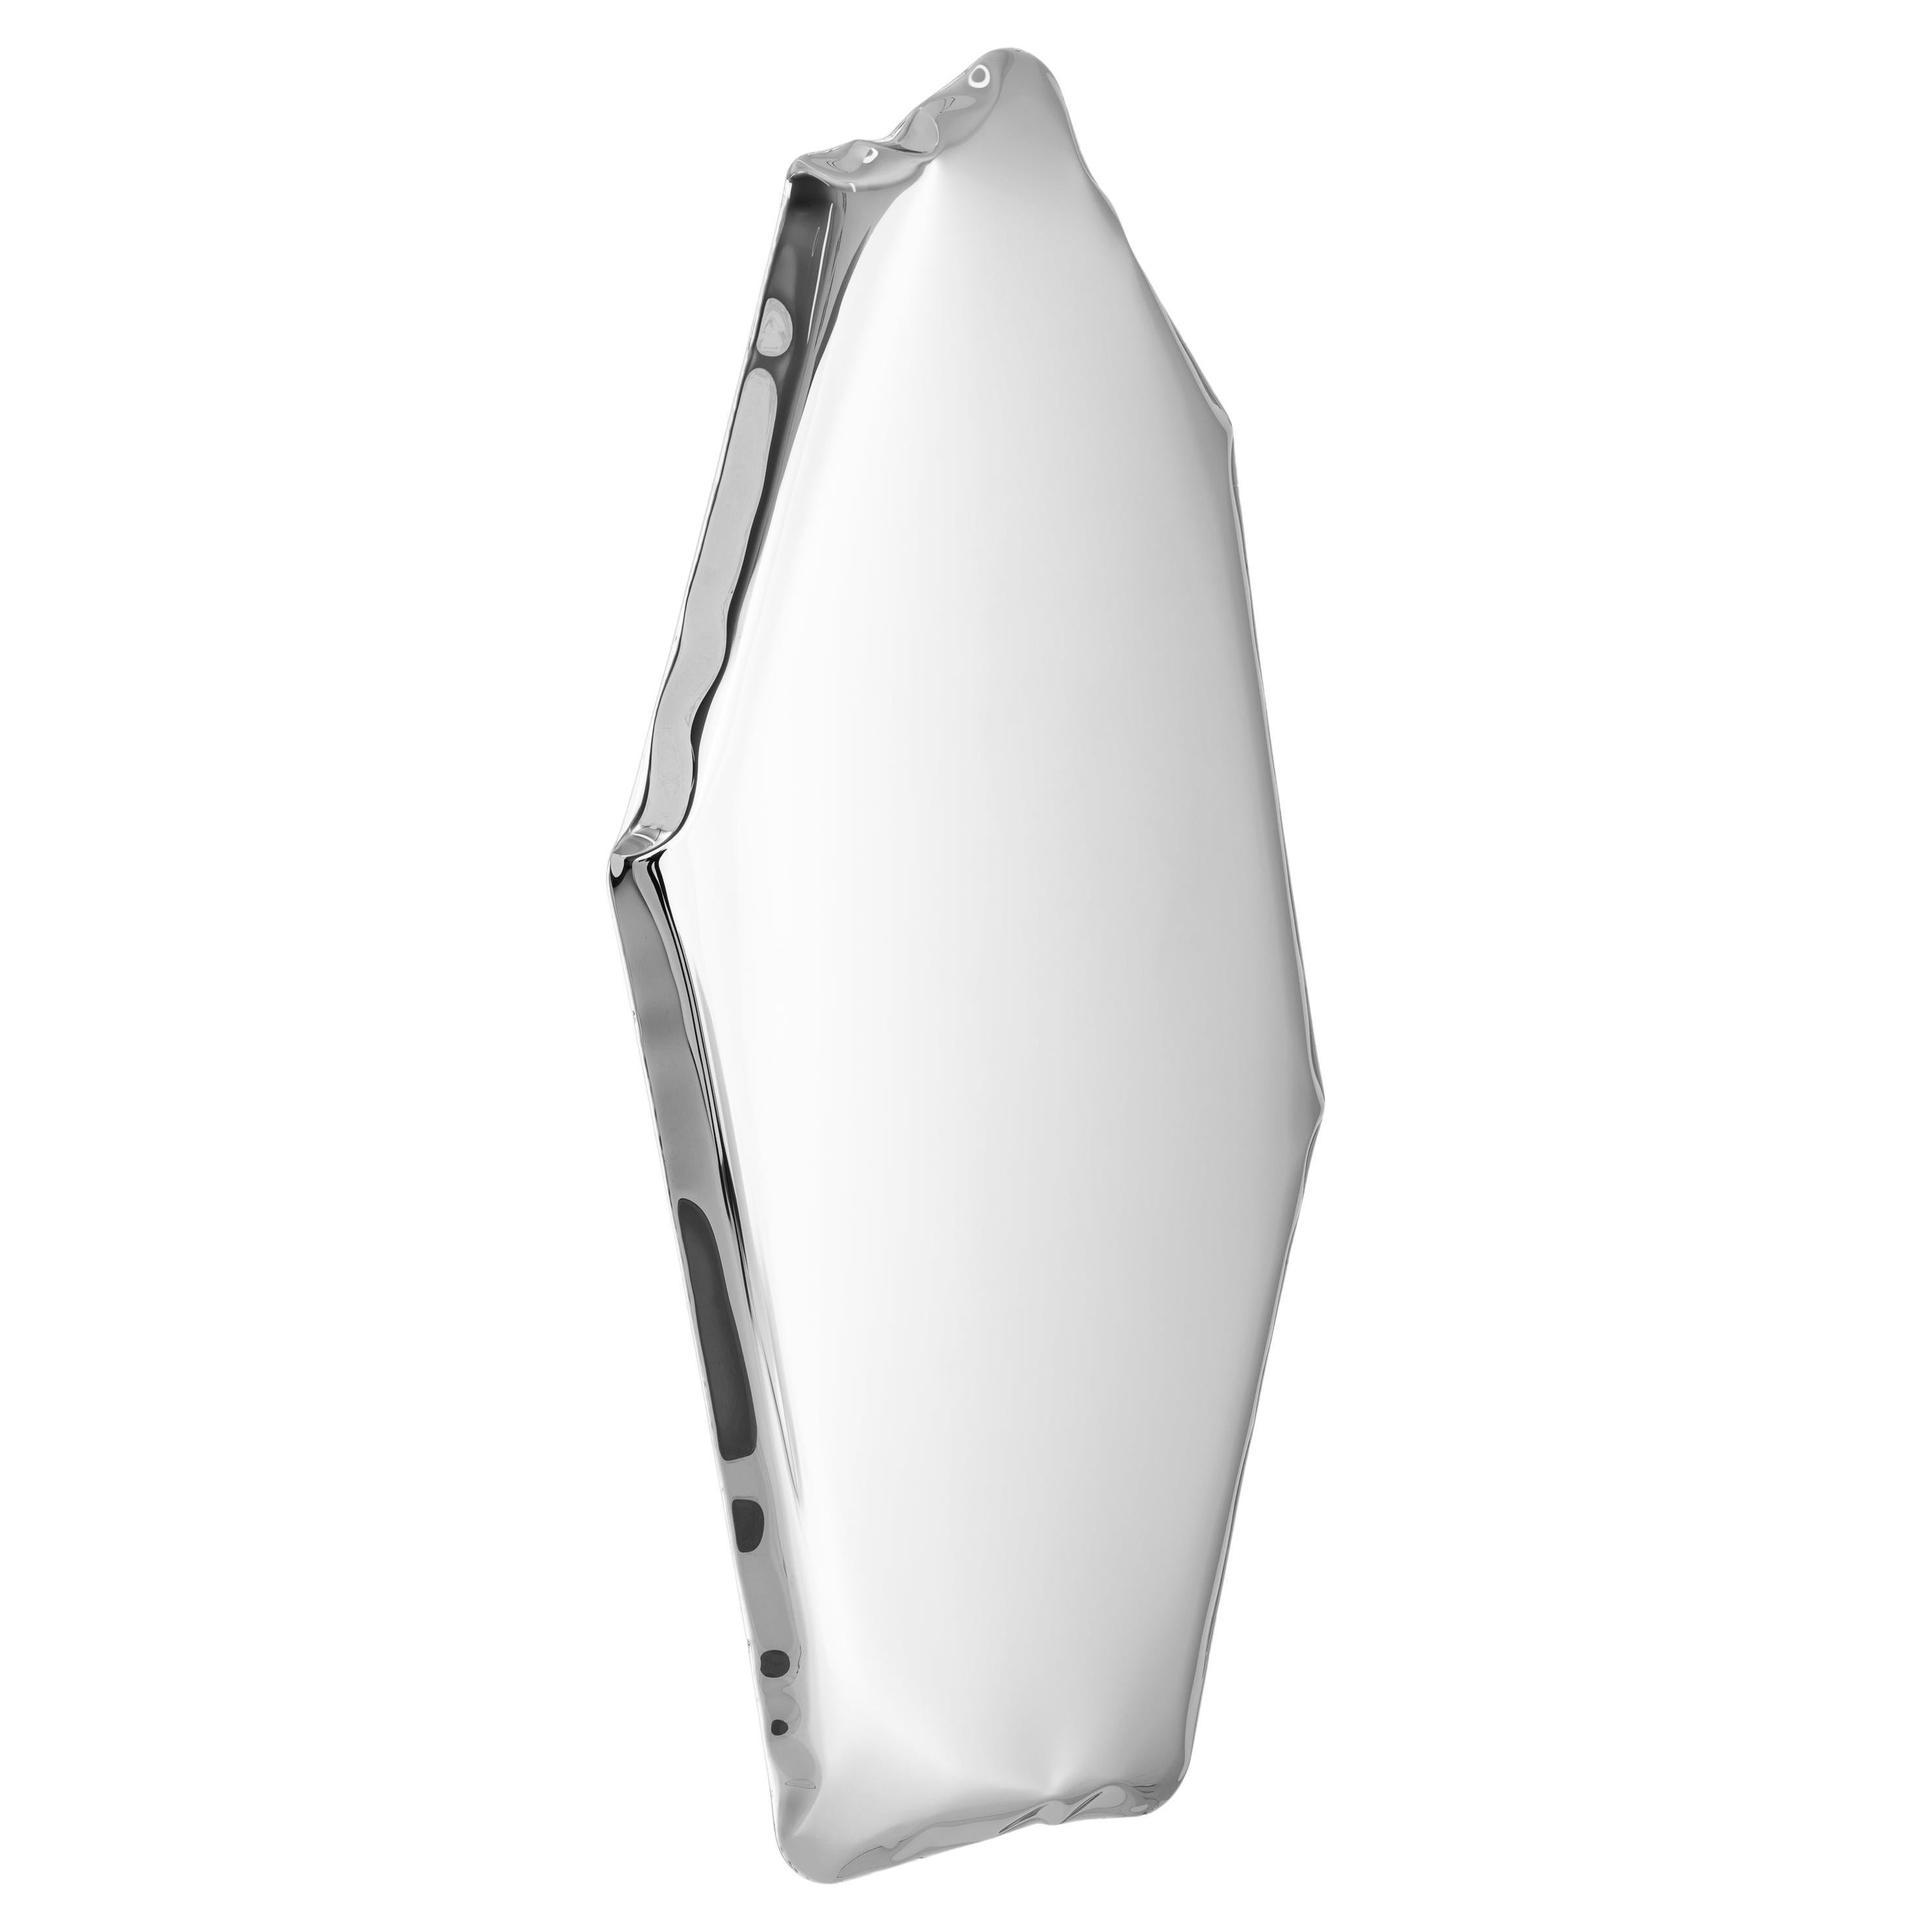 Stainless Steel Tafla C4 Sculptural Wall Mirror by Zieta For Sale